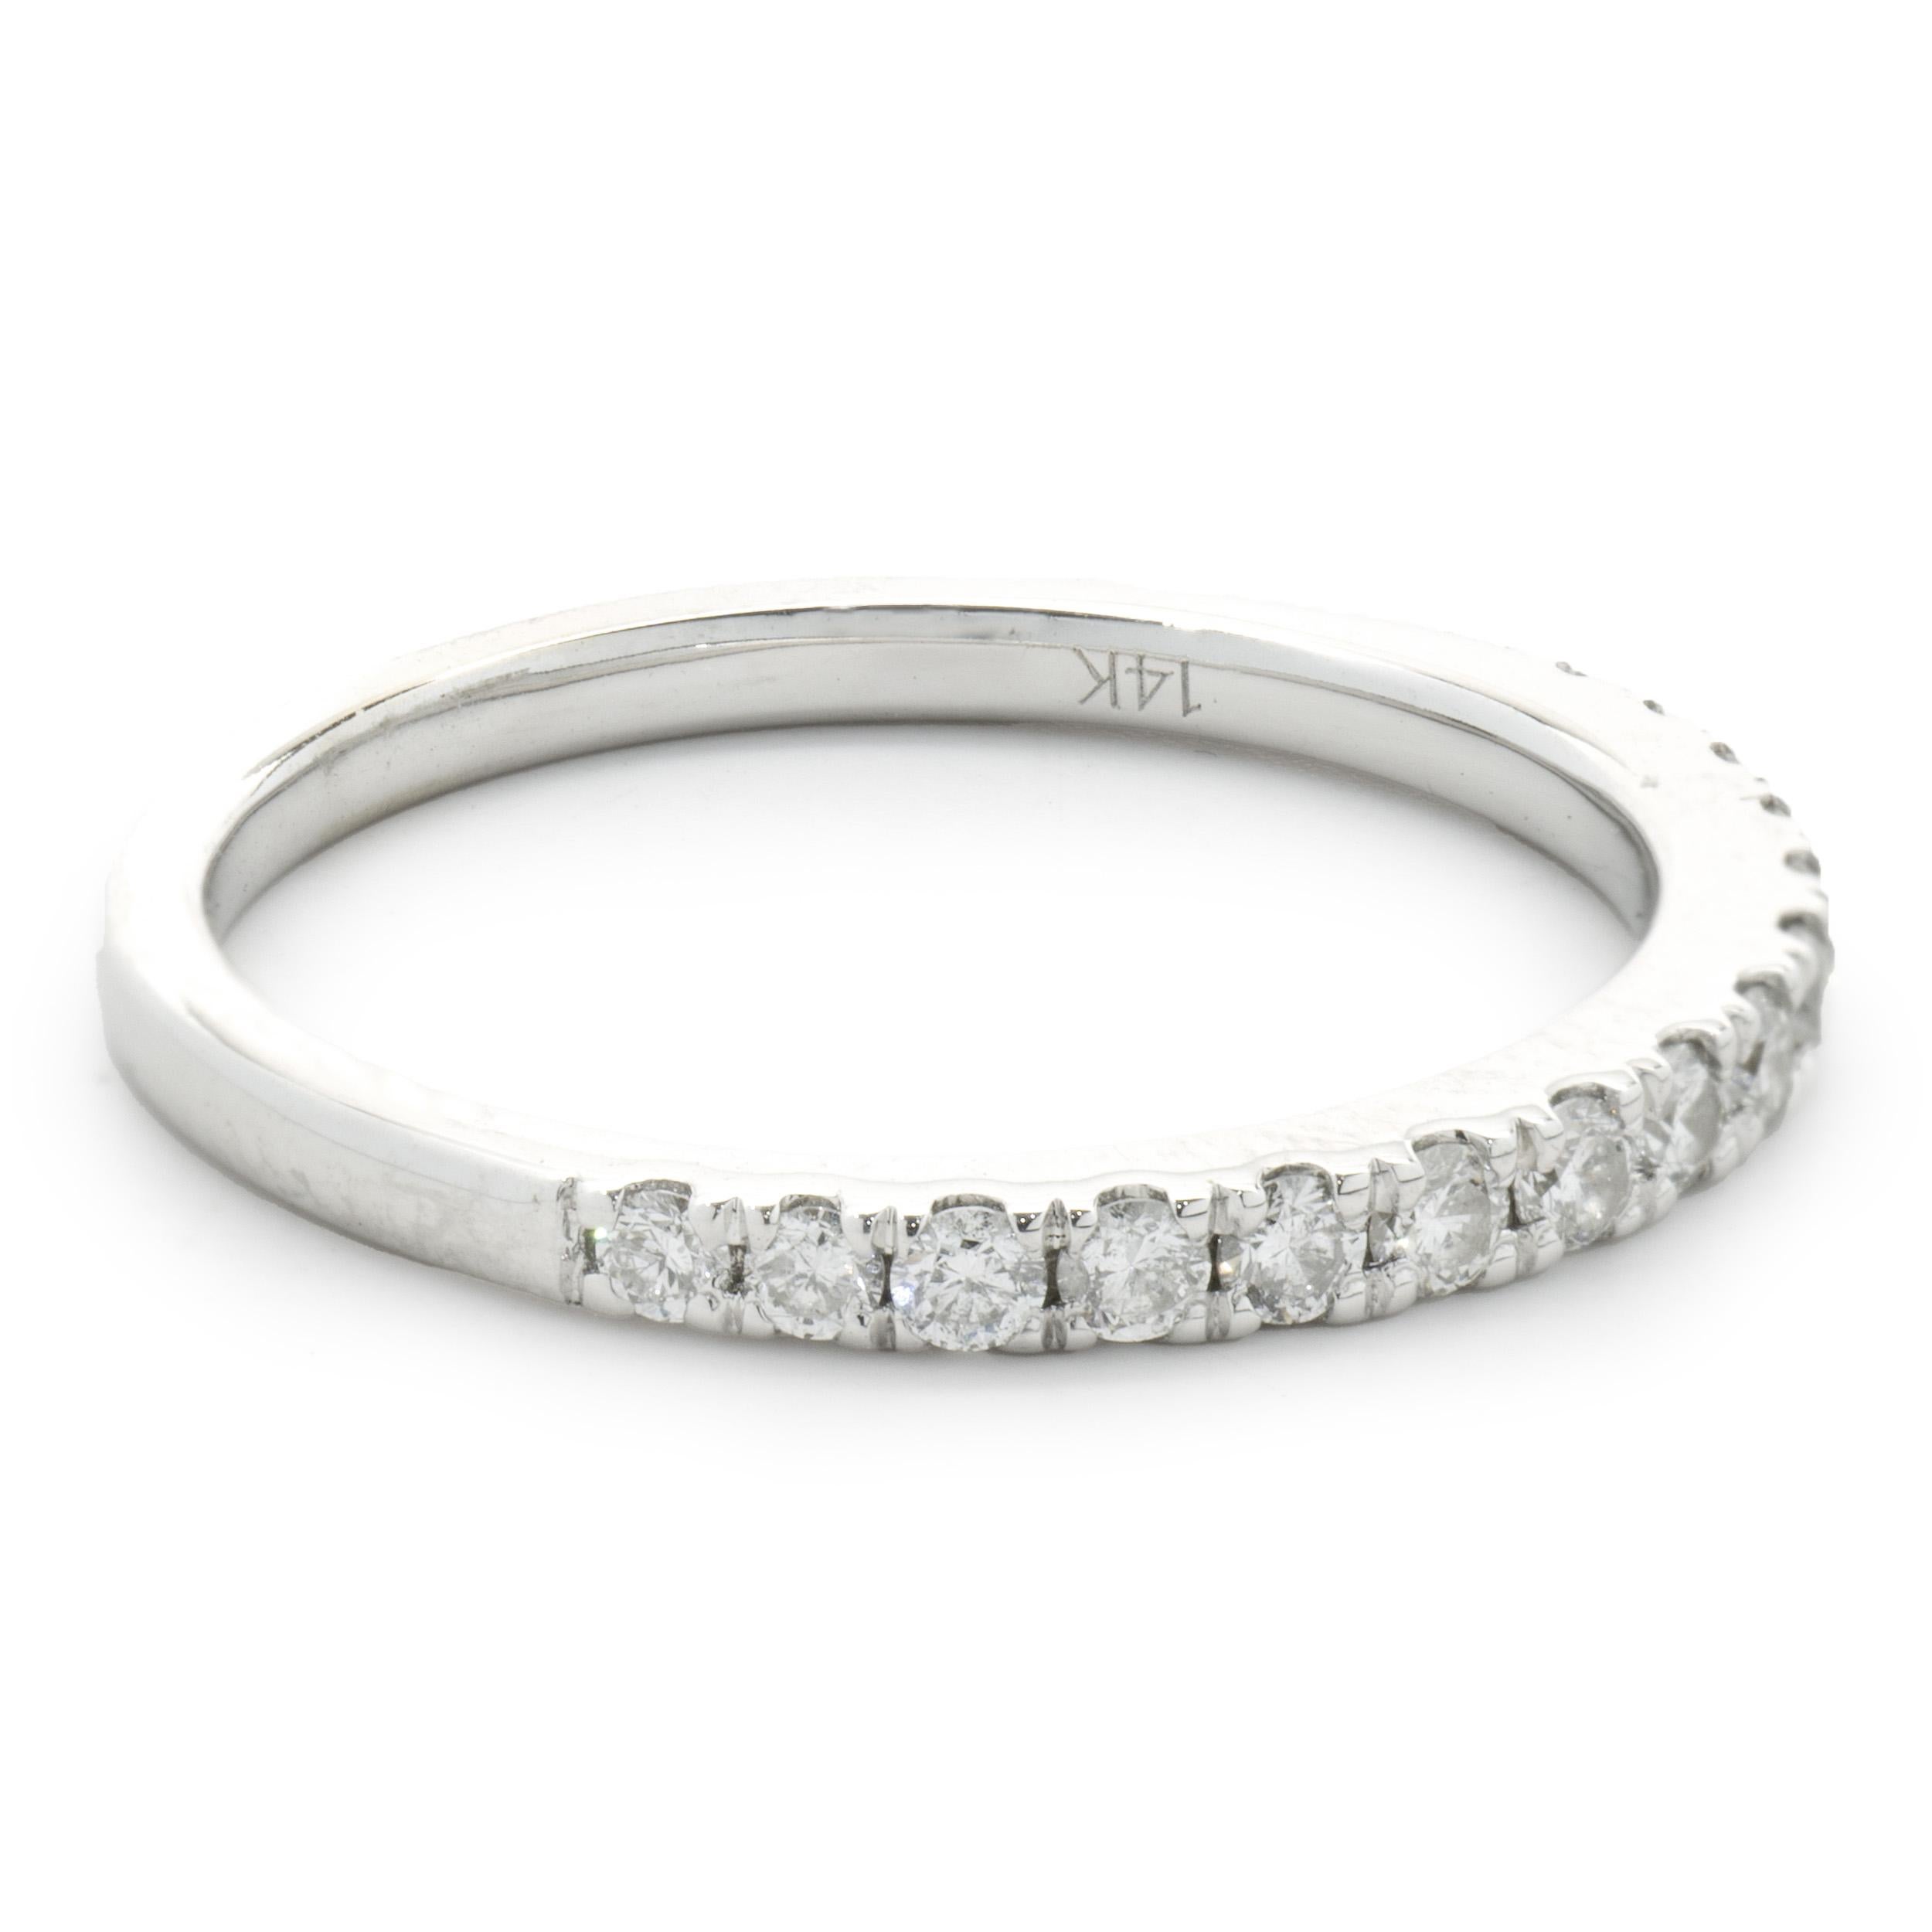 Designer: Custom
Material: 14K white gold
Diamonds: 15 round brilliant cut = 0.45cttw
Color: H
Clarity: SI1
Size: 7 sizing available 
Dimensions: ring measures 2mm in width
Weight: 2.18 grams